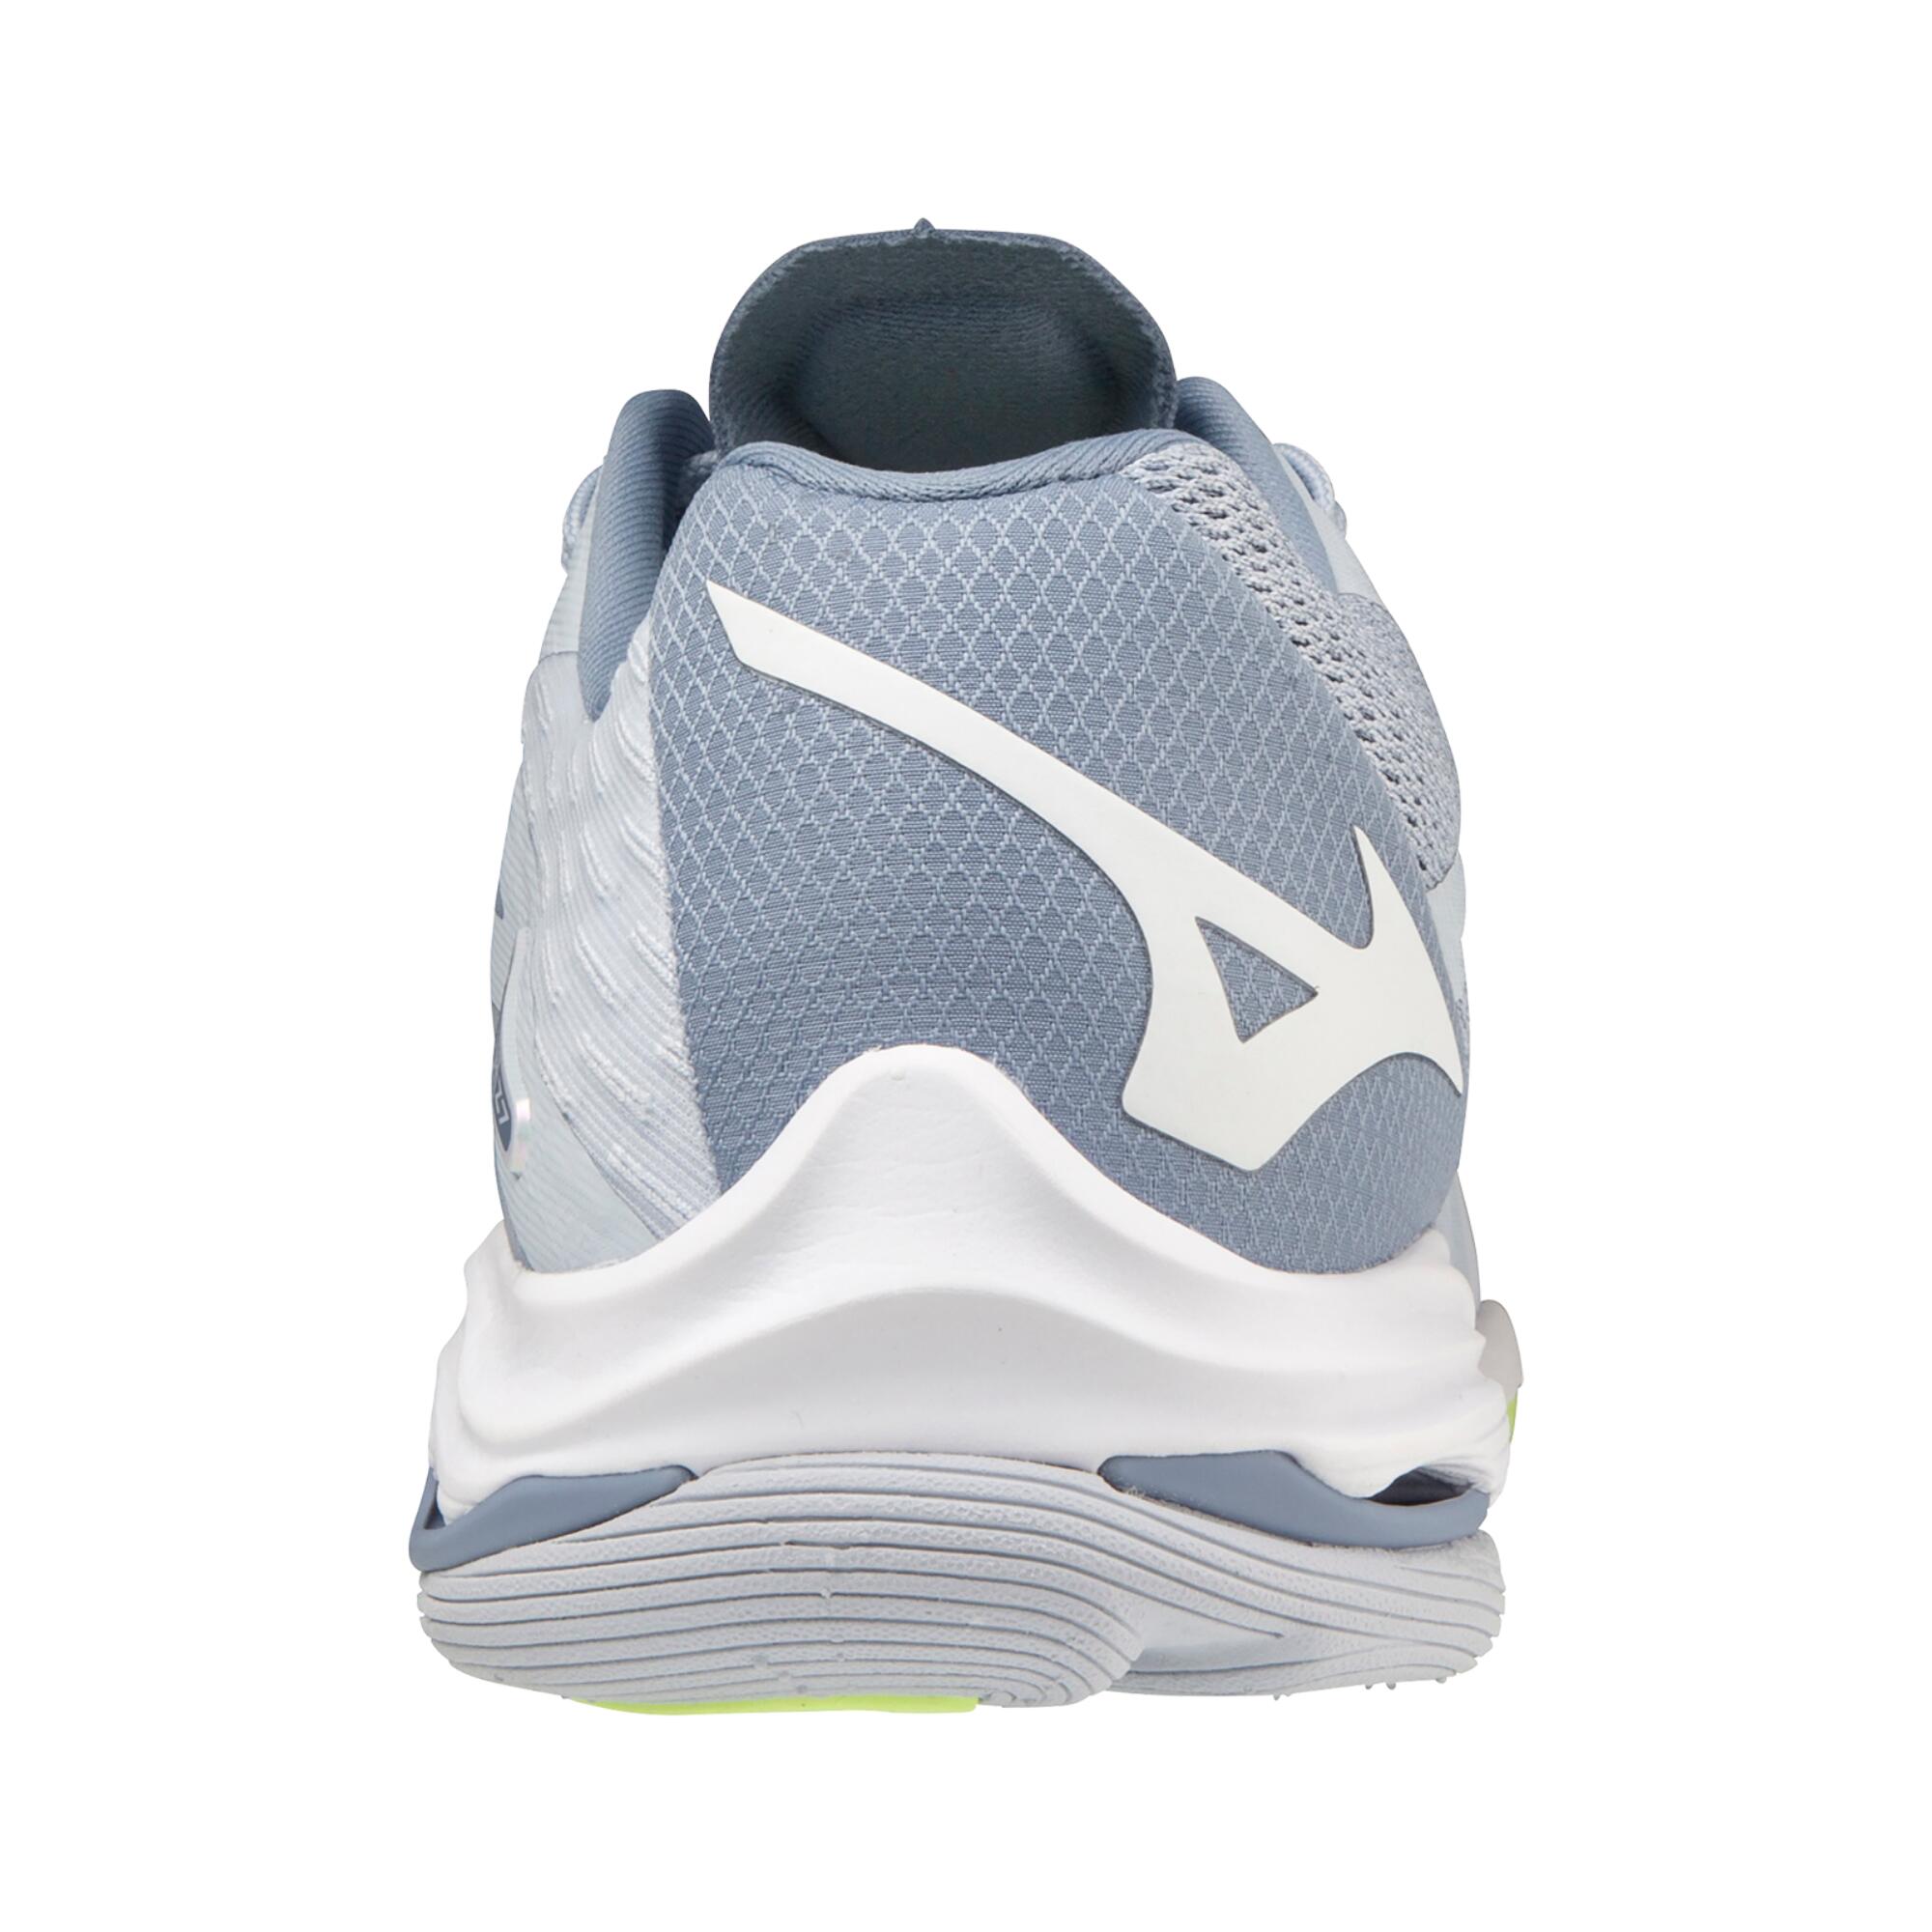 WOMEN'S VOLLEYBALL SHOES MIZUNO LIGHTNING Z7 LOW GREY - LIME 4/5